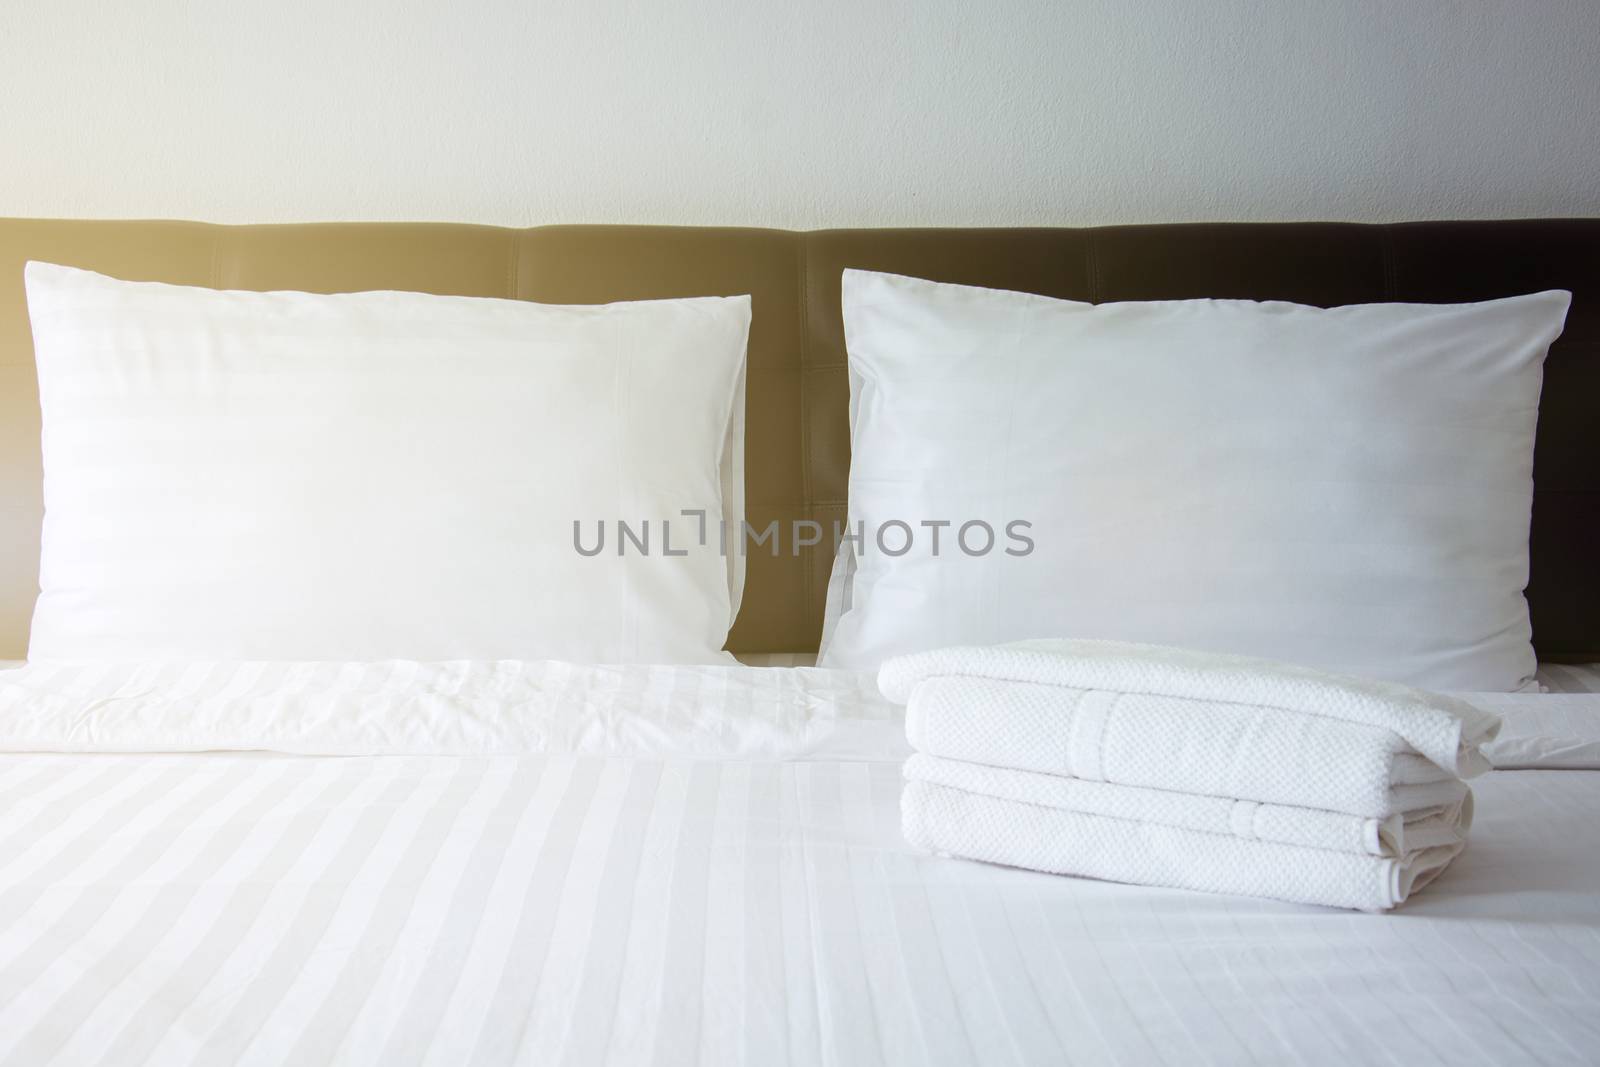 white pillow, white blanket and white towel on bed in bedroom wi by rakoptonLPN